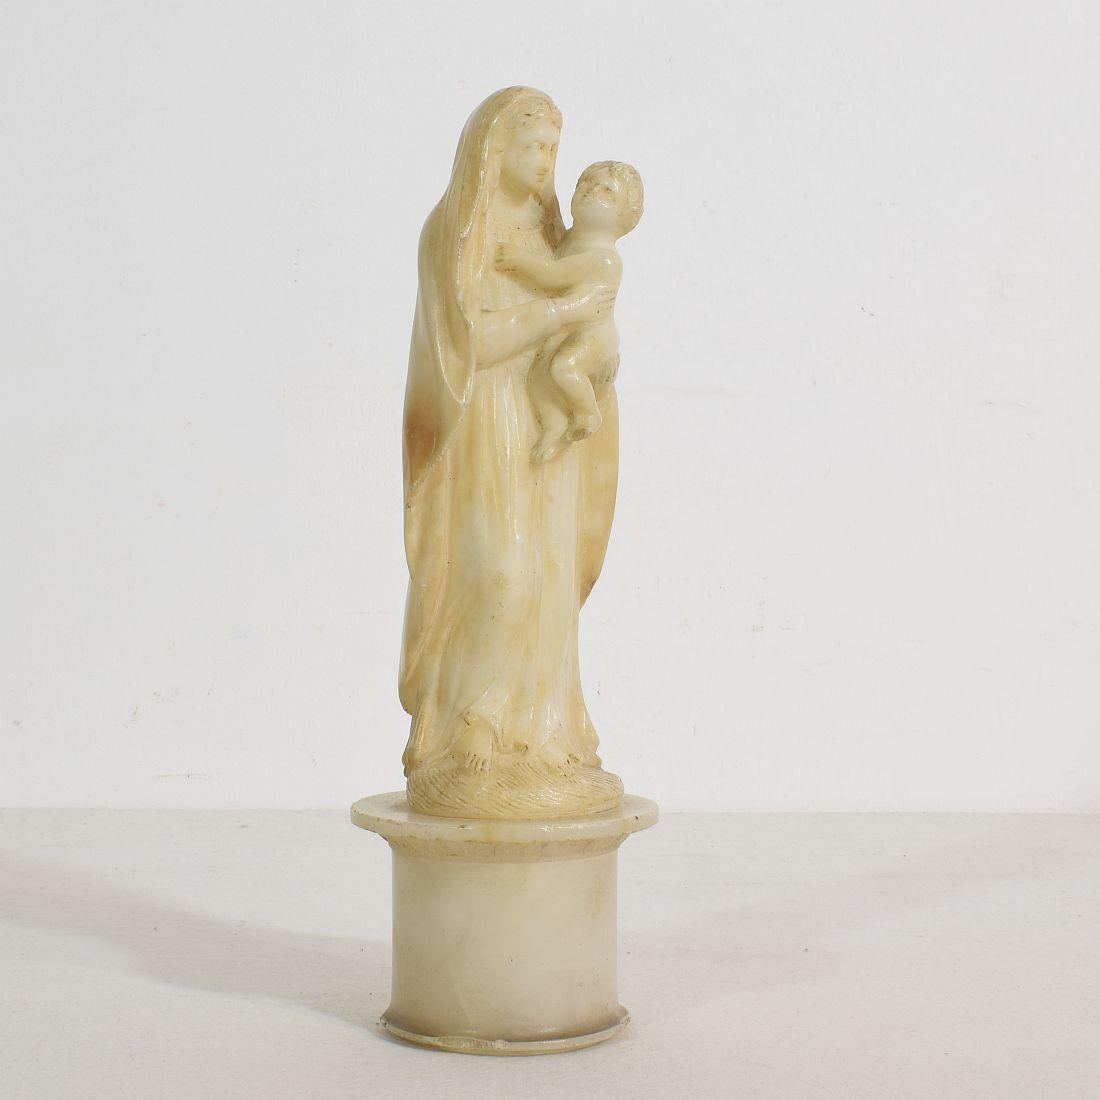 Beautiful small carved alabaster Madonna with child, France, circa 1780-1850.
Weathered and some minor losses.